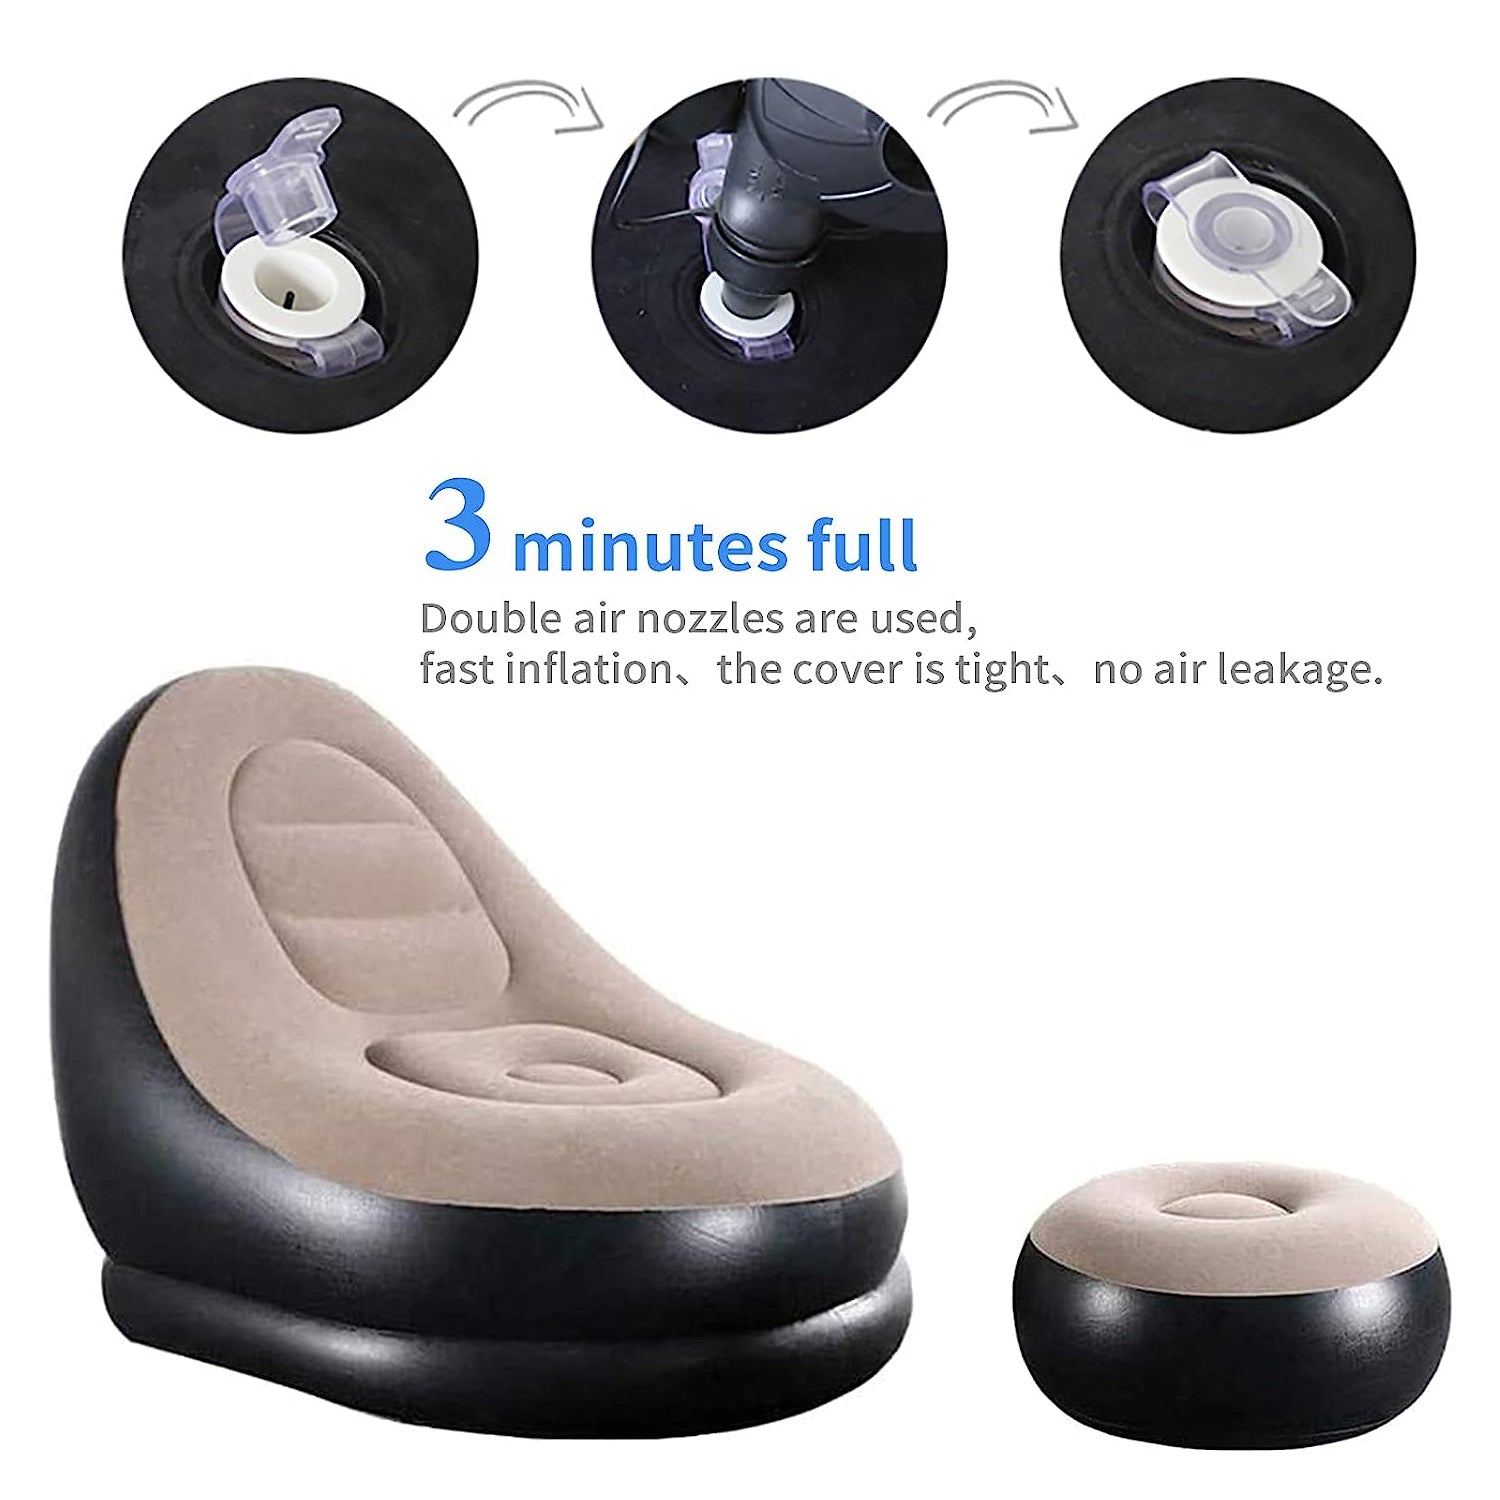 8062 Inflatable Sofa Lounge Chair Ottoman, Blow Up Chaise Lounge Air Sofa, Indoor Flocking Leisure Couch for Home Office Rest, Inflated Recliners Portable Deck Chair for Outdoor Travel Camping Picnic. JK Trends